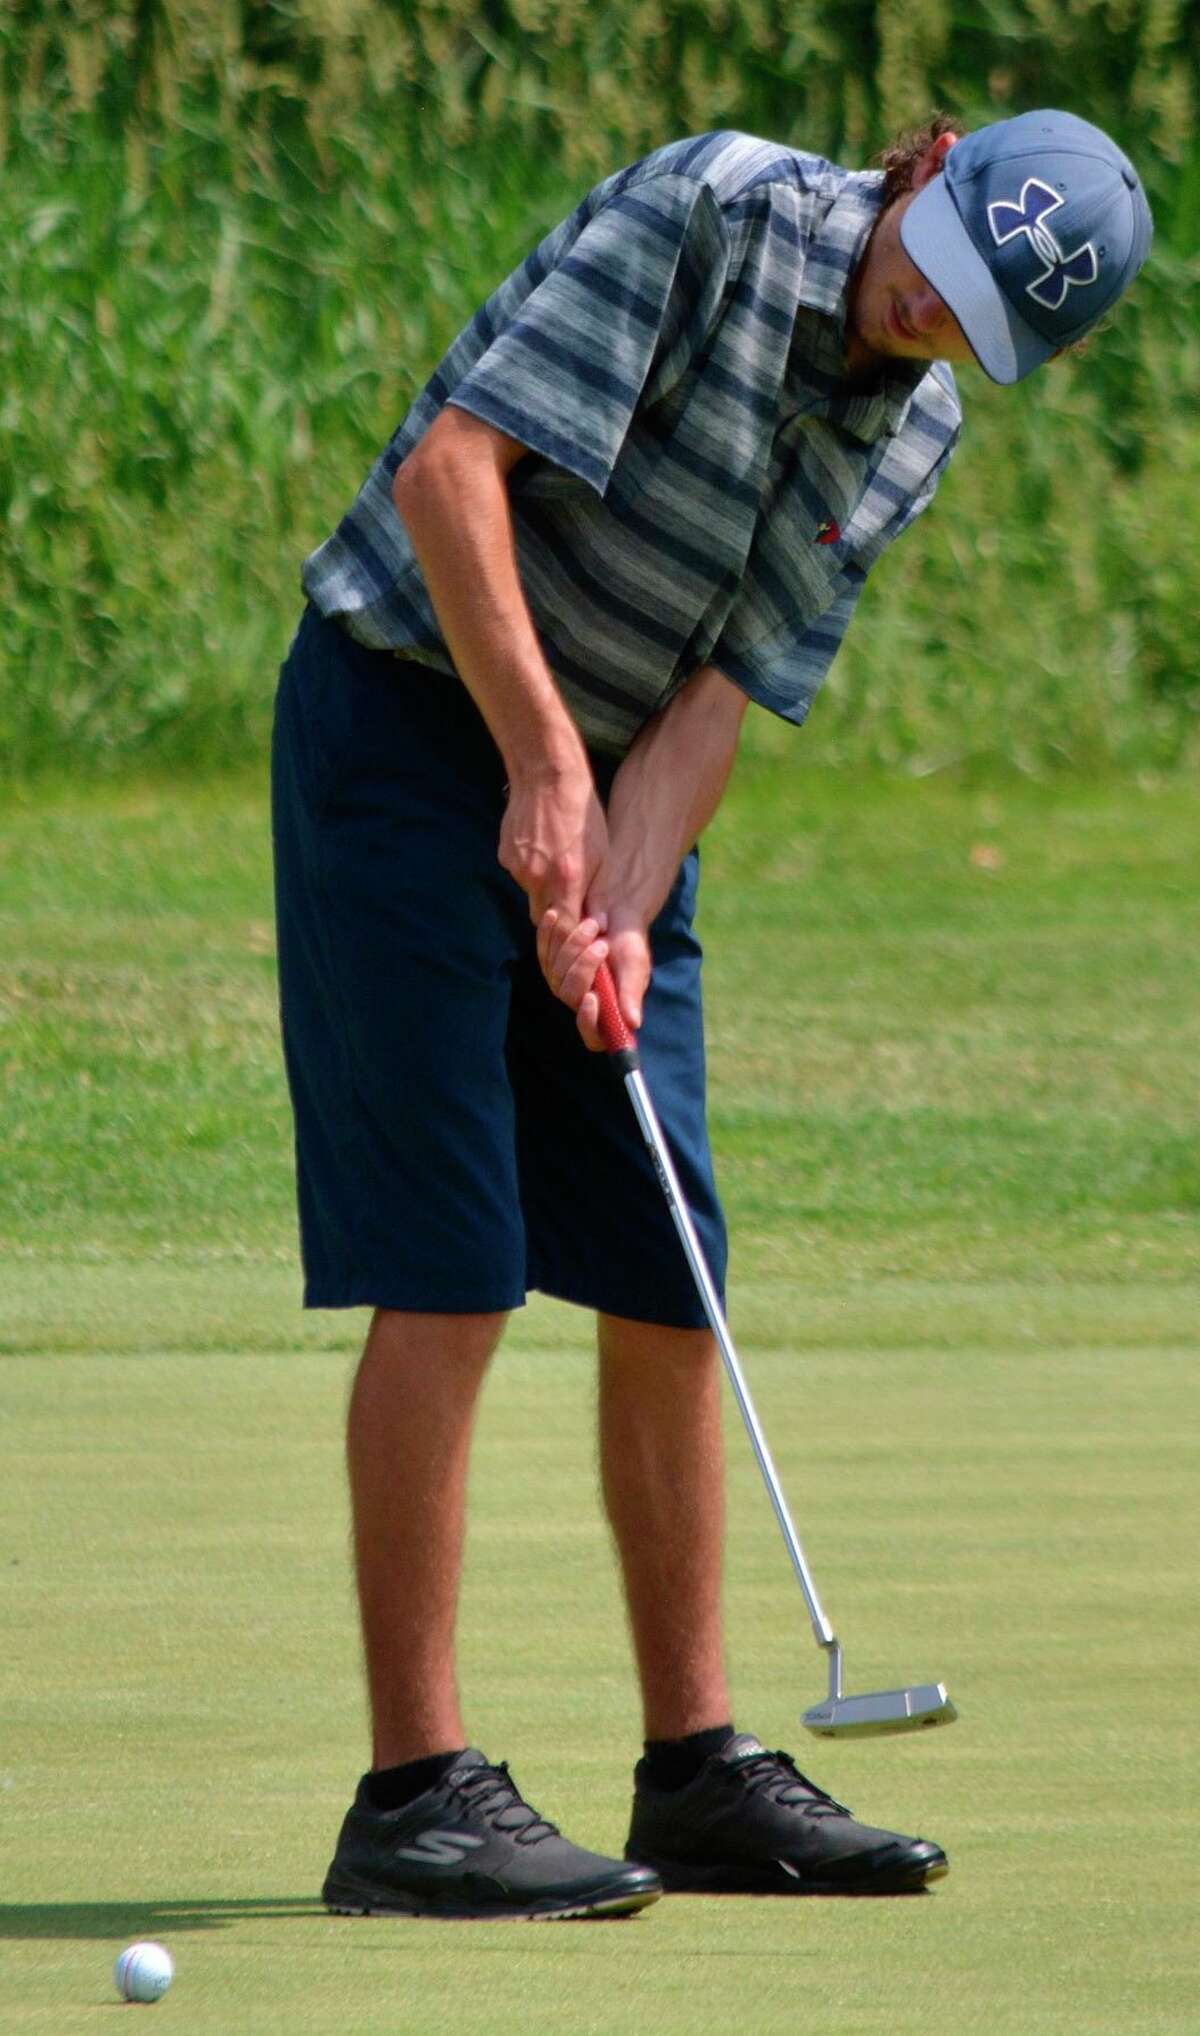 Big Rapids' Brett Lilienthal putts on the Meadows Golf Course on Friday at the Division 3 state finals. (Courtesy photo)